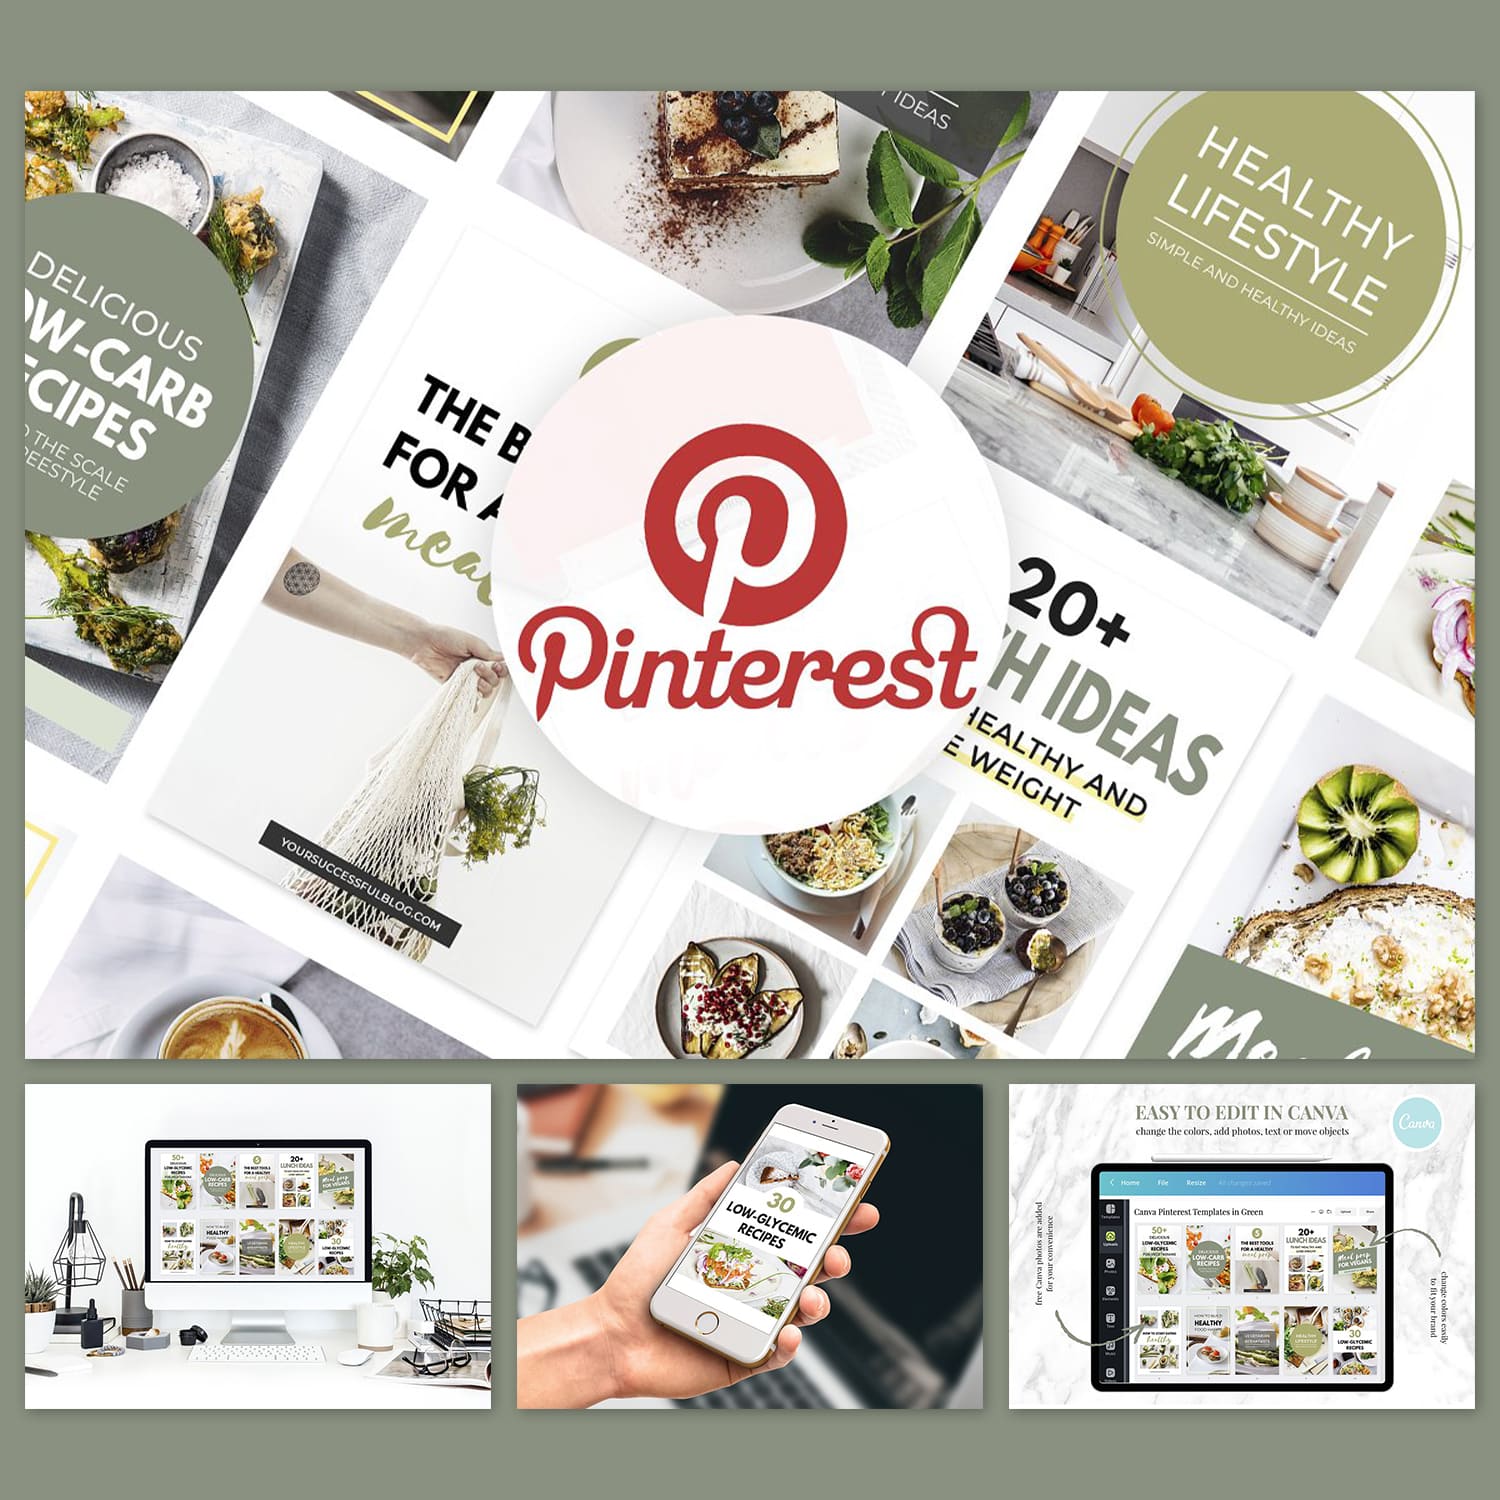 Canva Pinterest Templates in Green cover image.